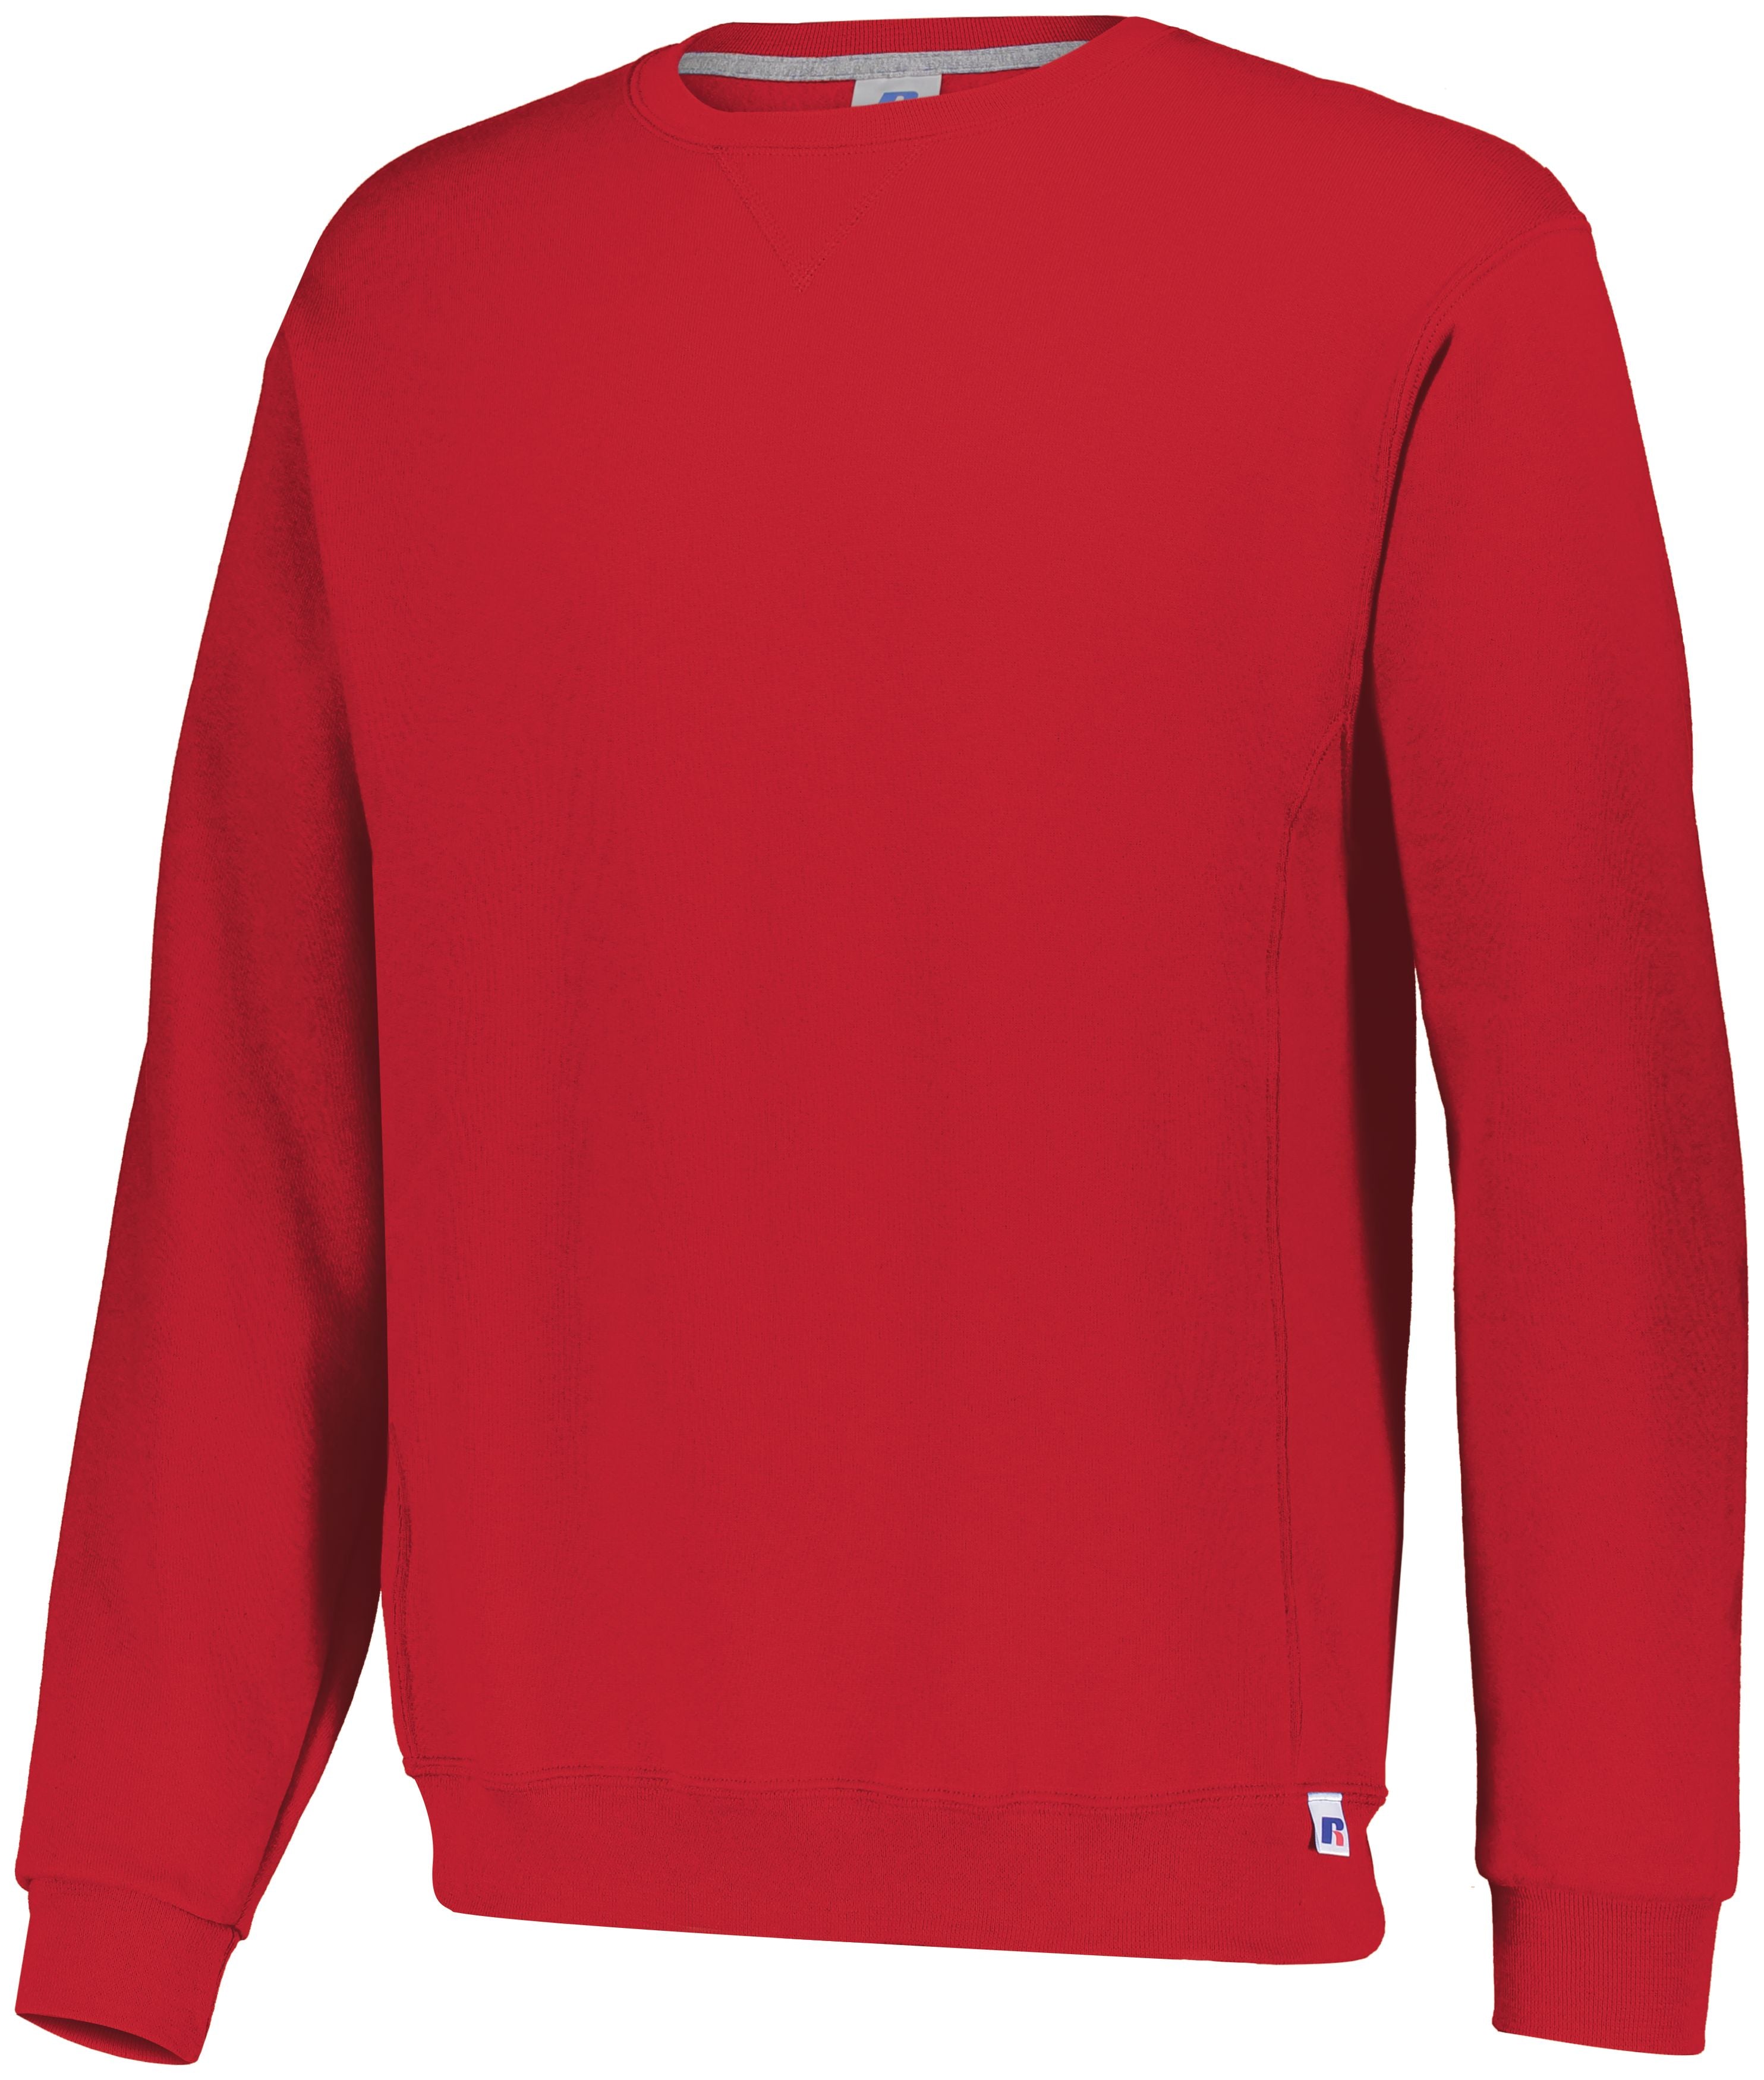 Russell Athletic Dri-Power  Fleece Crew Sweatshirt in True Red  -Part of the Adult, Adult-Sweatshirt, Russell-Athletic-Products, Outerwear product lines at KanaleyCreations.com